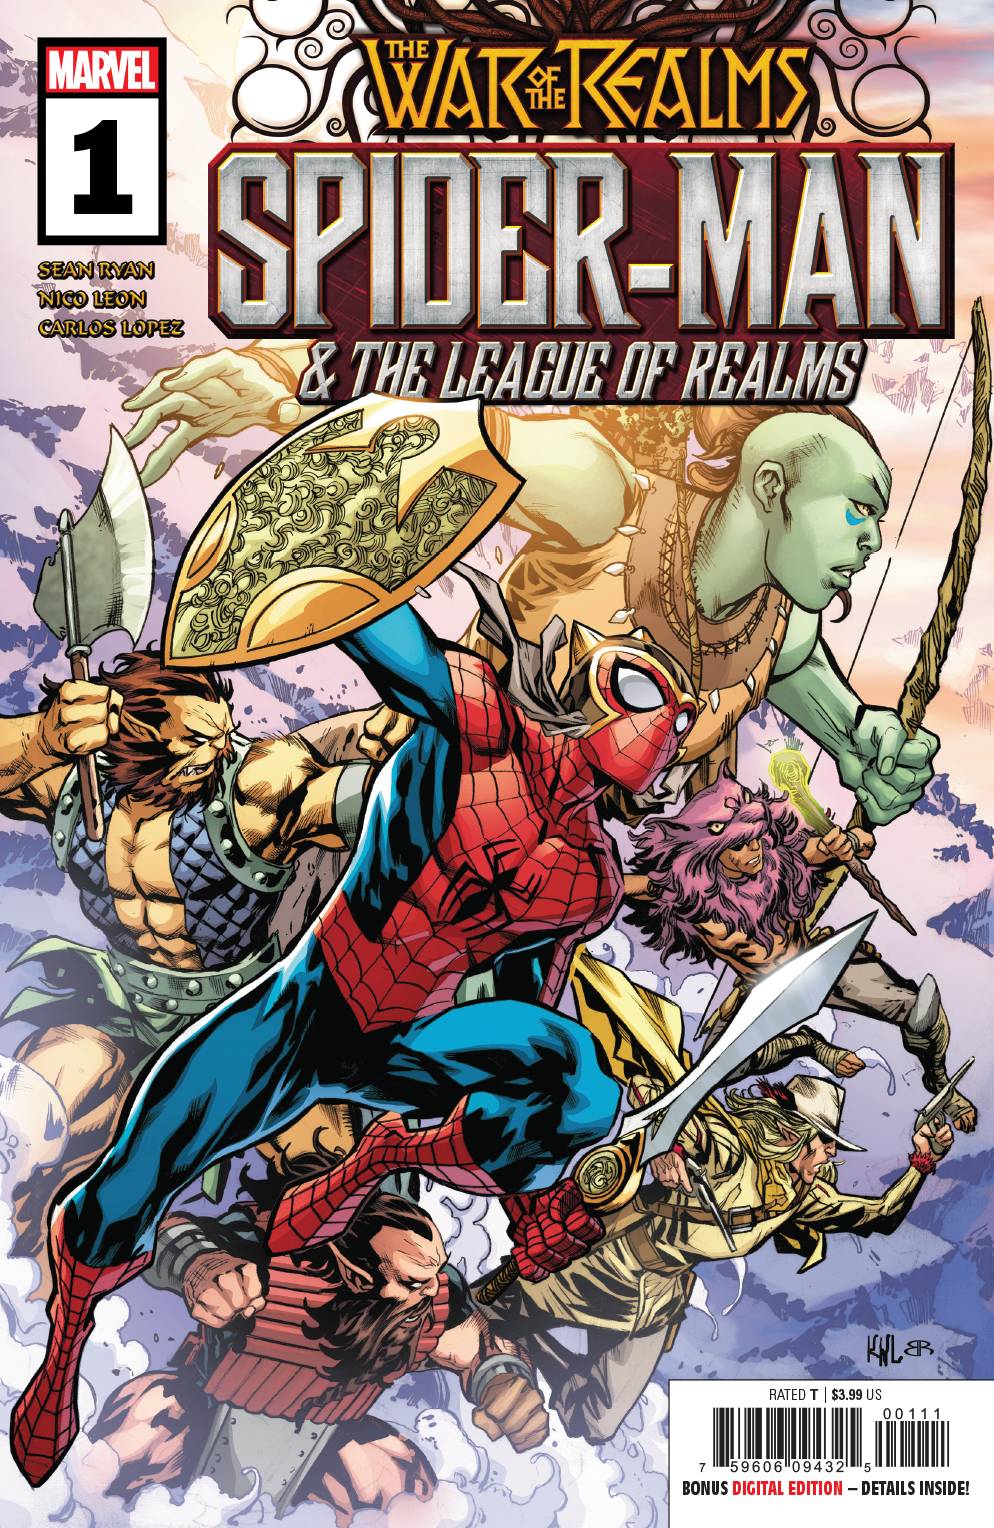 Spider-Man & The League of Realms #1 (of 3) [2019]